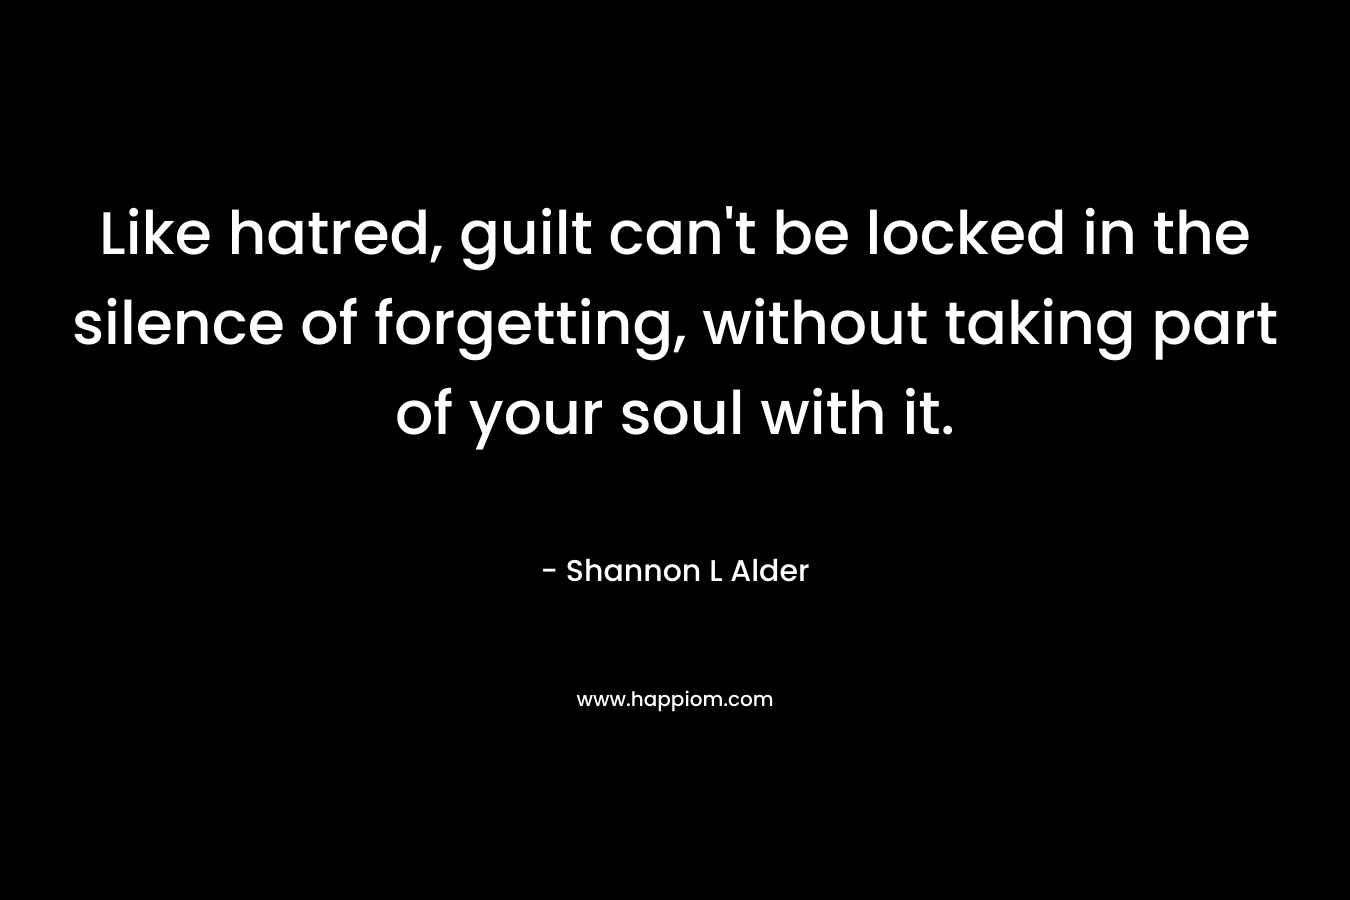 Like hatred, guilt can't be locked in the silence of forgetting, without taking part of your soul with it.